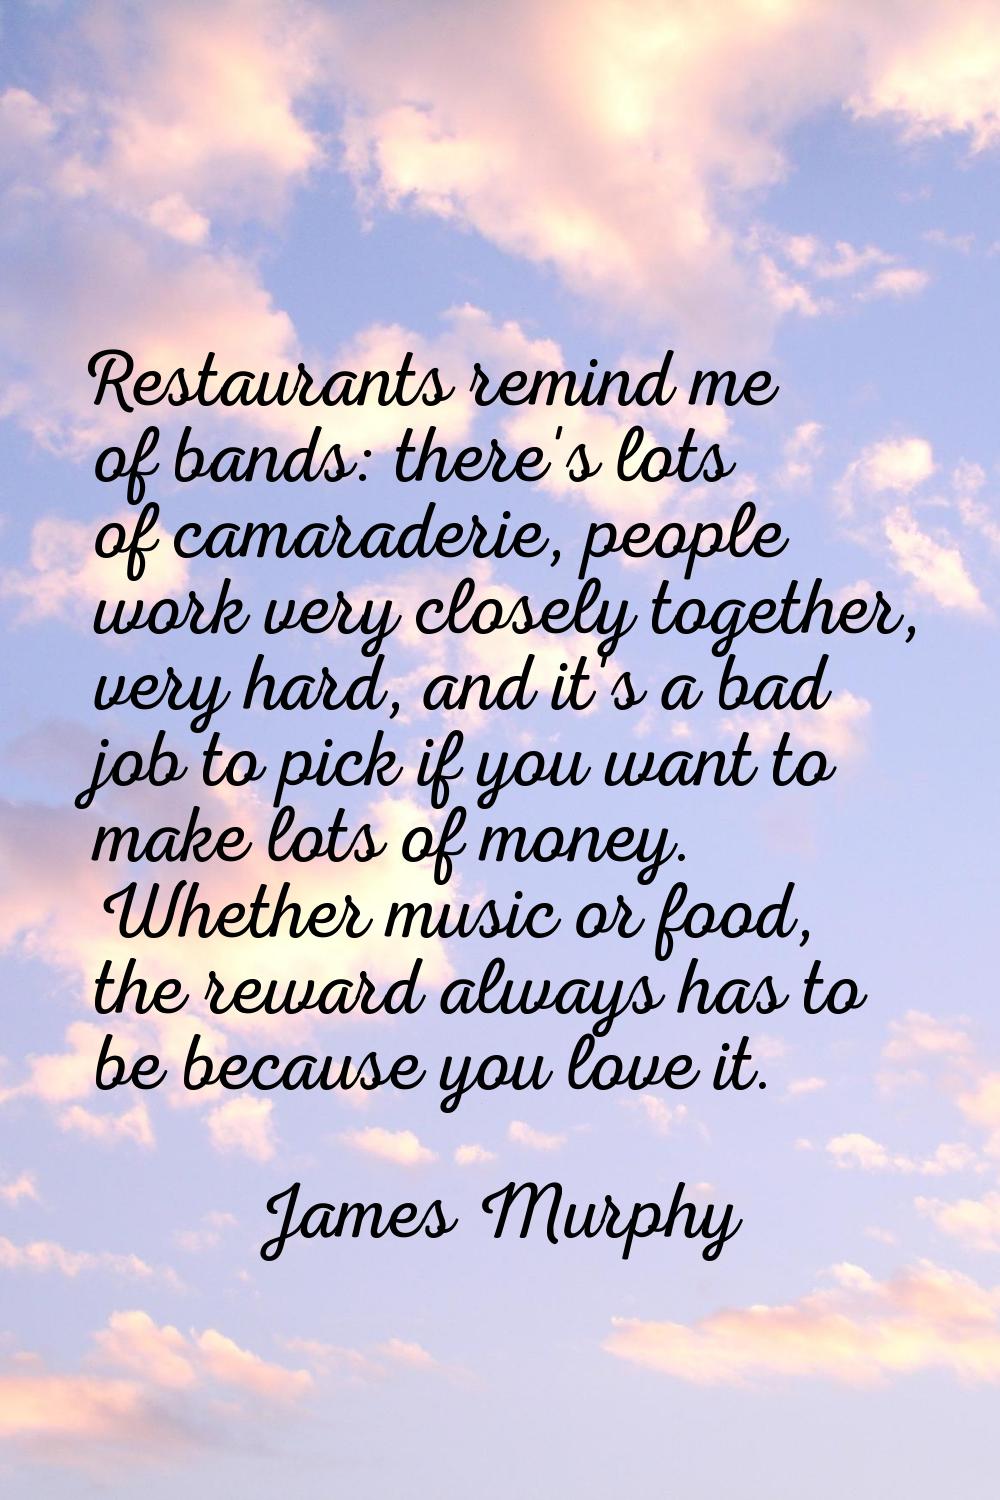 Restaurants remind me of bands: there's lots of camaraderie, people work very closely together, ver